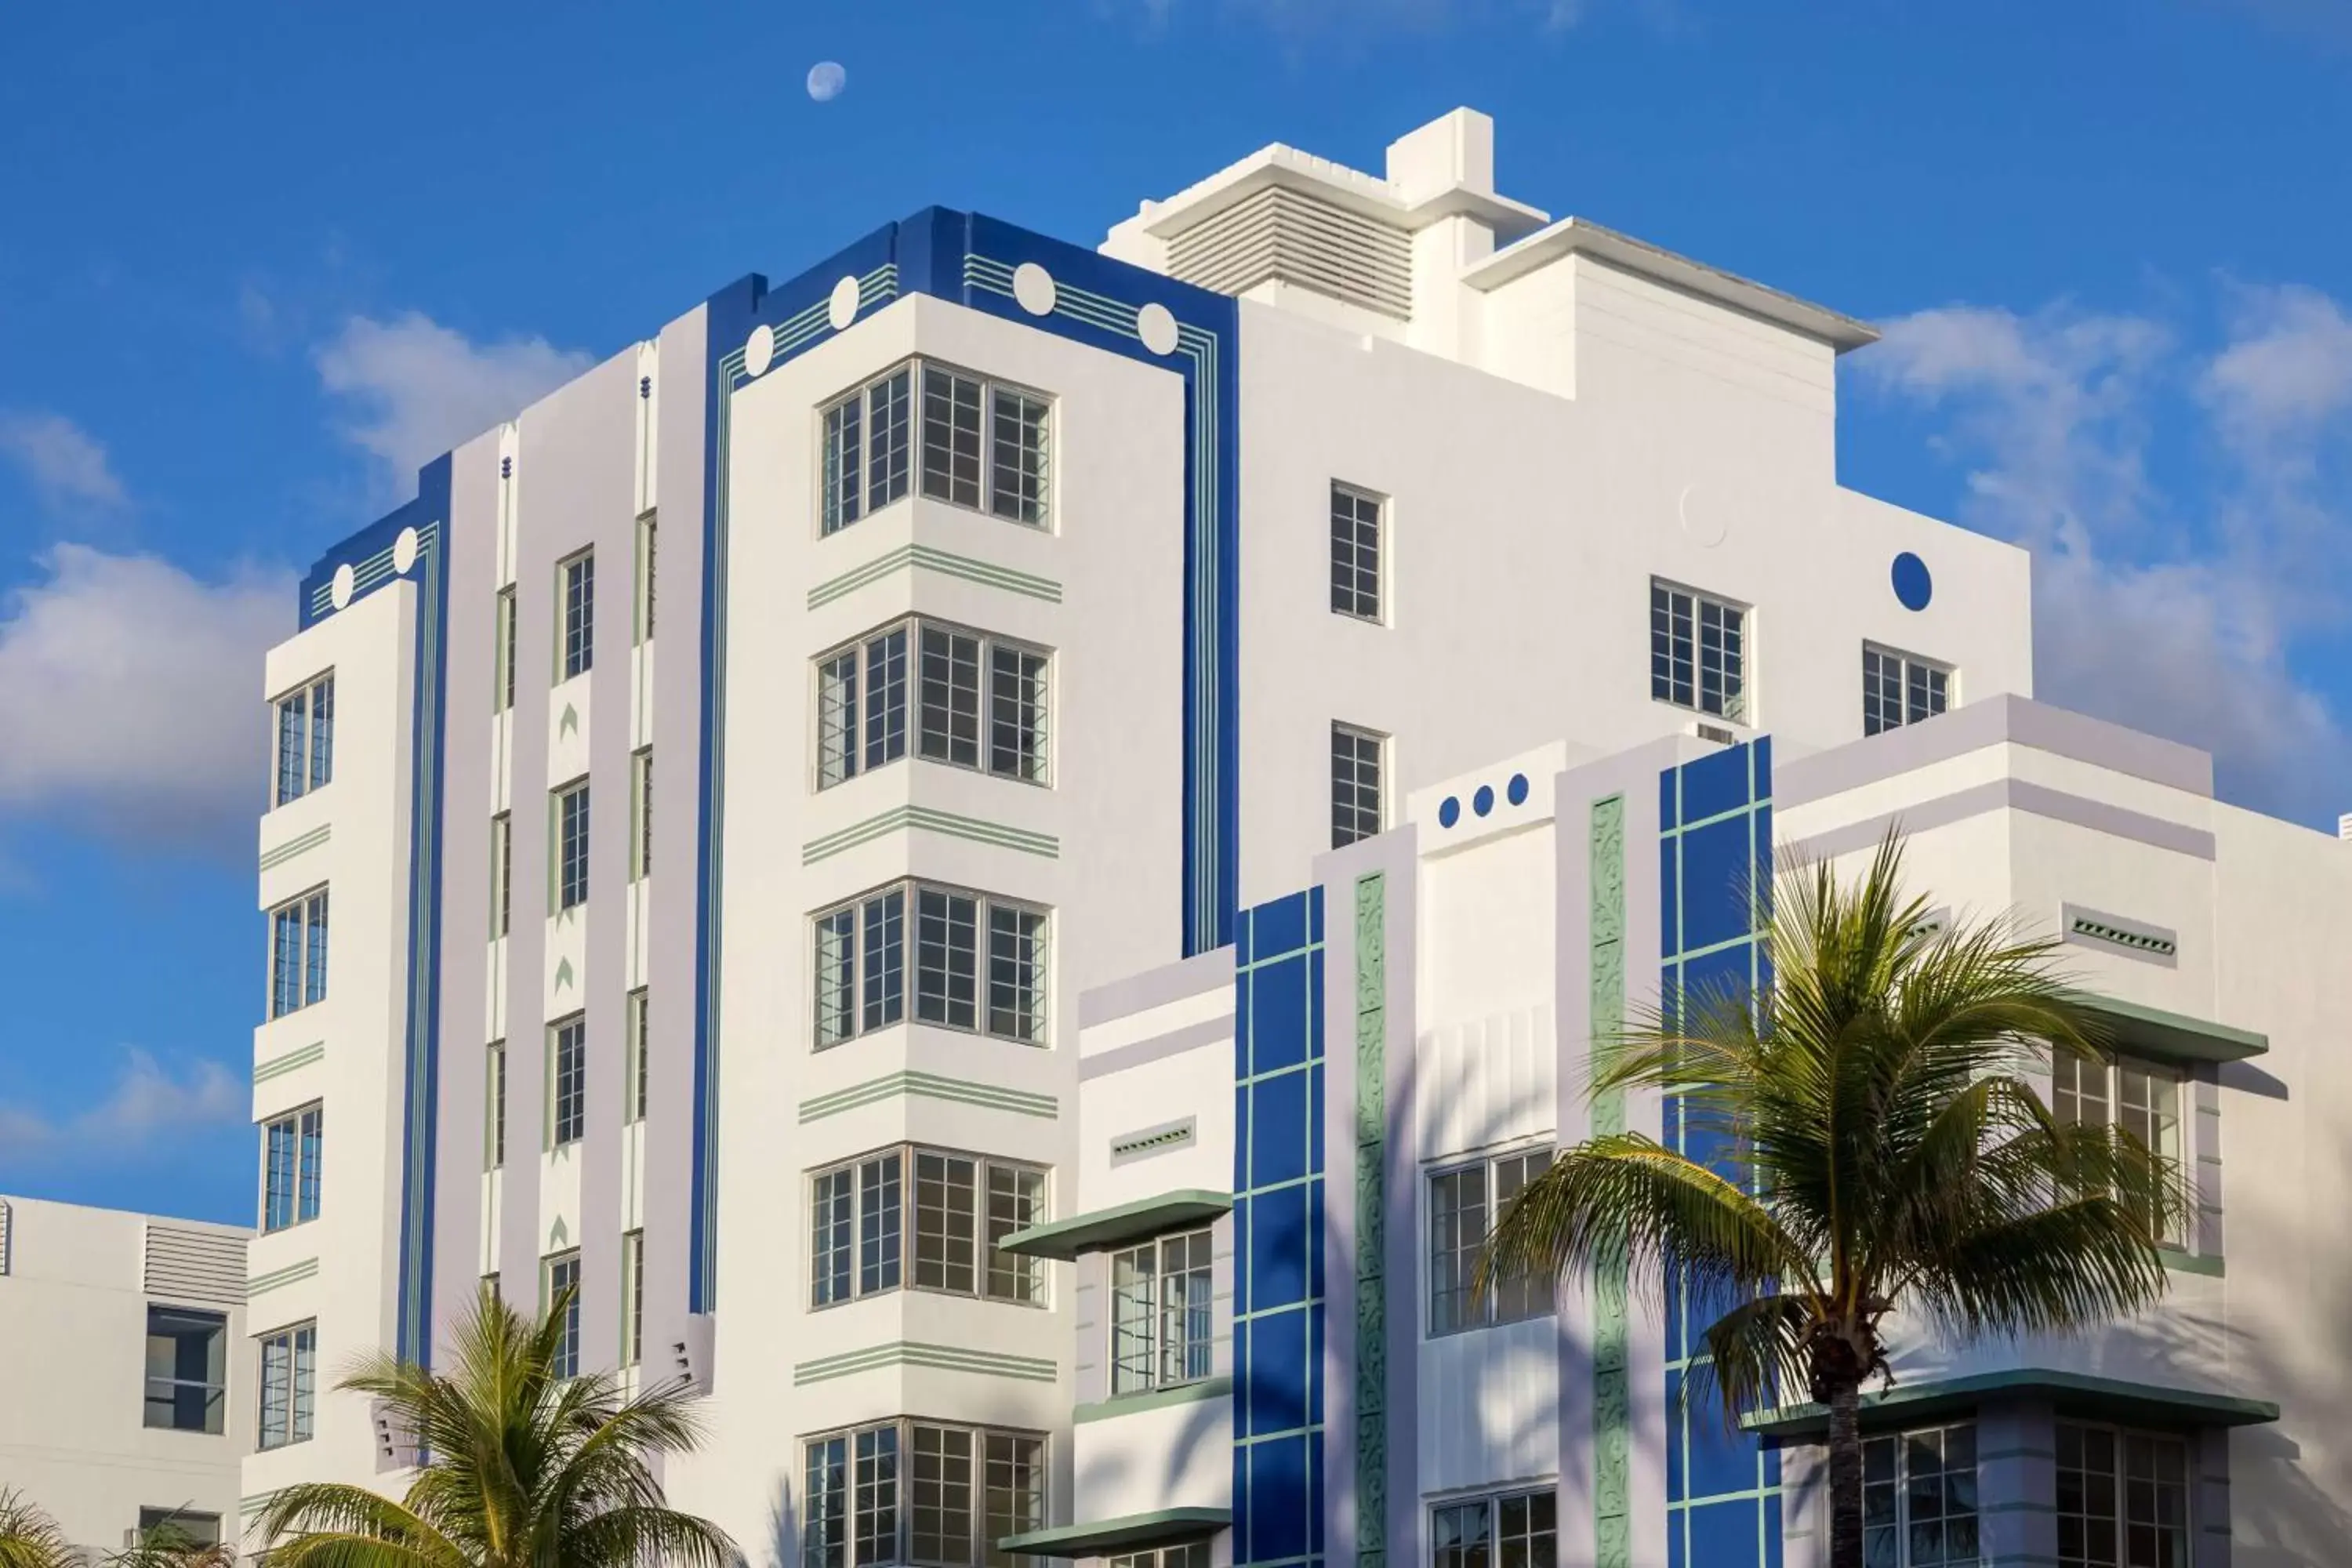 Property Building in The Gabriel Miami South Beach, Curio Collection by Hilton